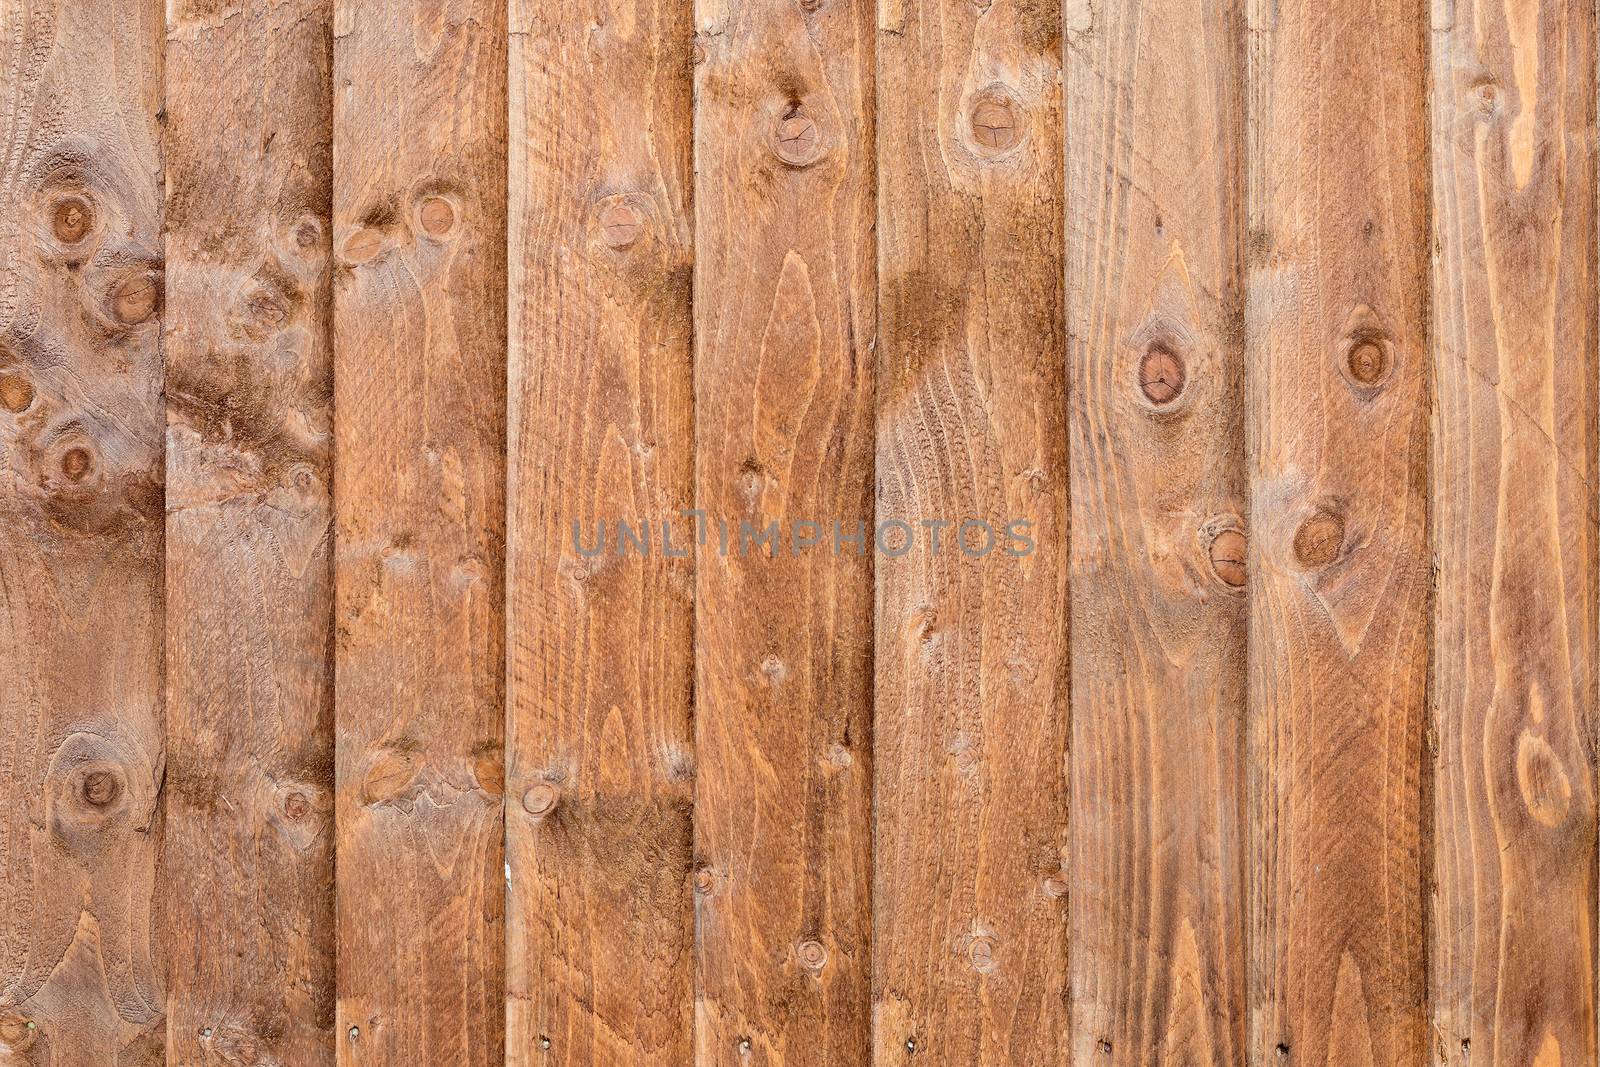 Patern created by a wooden fence by noimagination